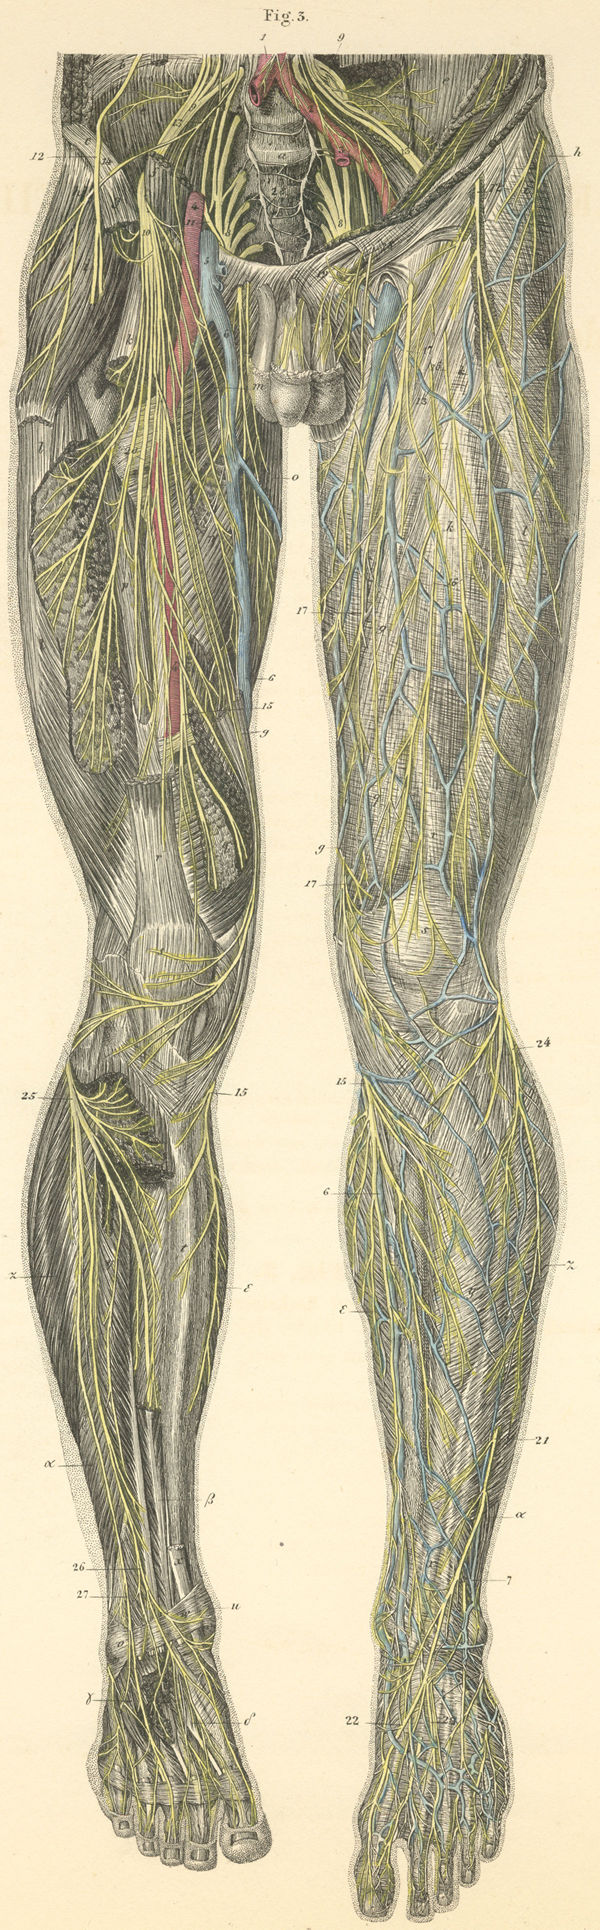 Skin and muscle nerves of the anterior surface of the left leg